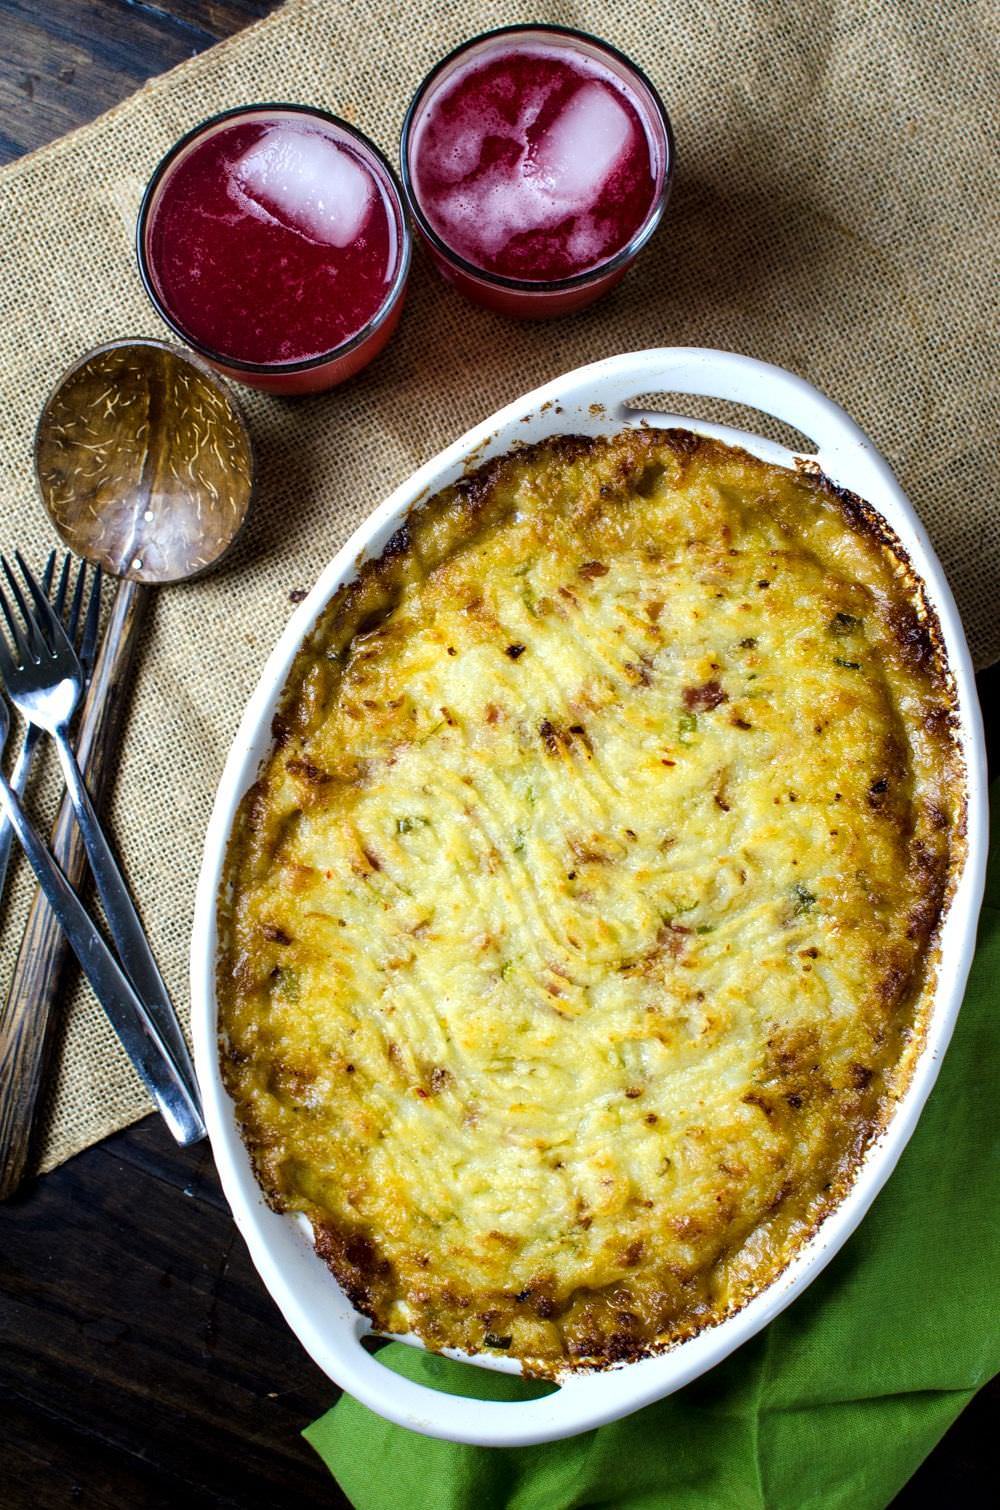 This Creamy Turkey Shepherd's Pot Pie topped with cheese, bacon and creamy mashed potato, and then baked until the potatoes turn a light golden brown, will have you counting down the days for the day after thanksgiving!